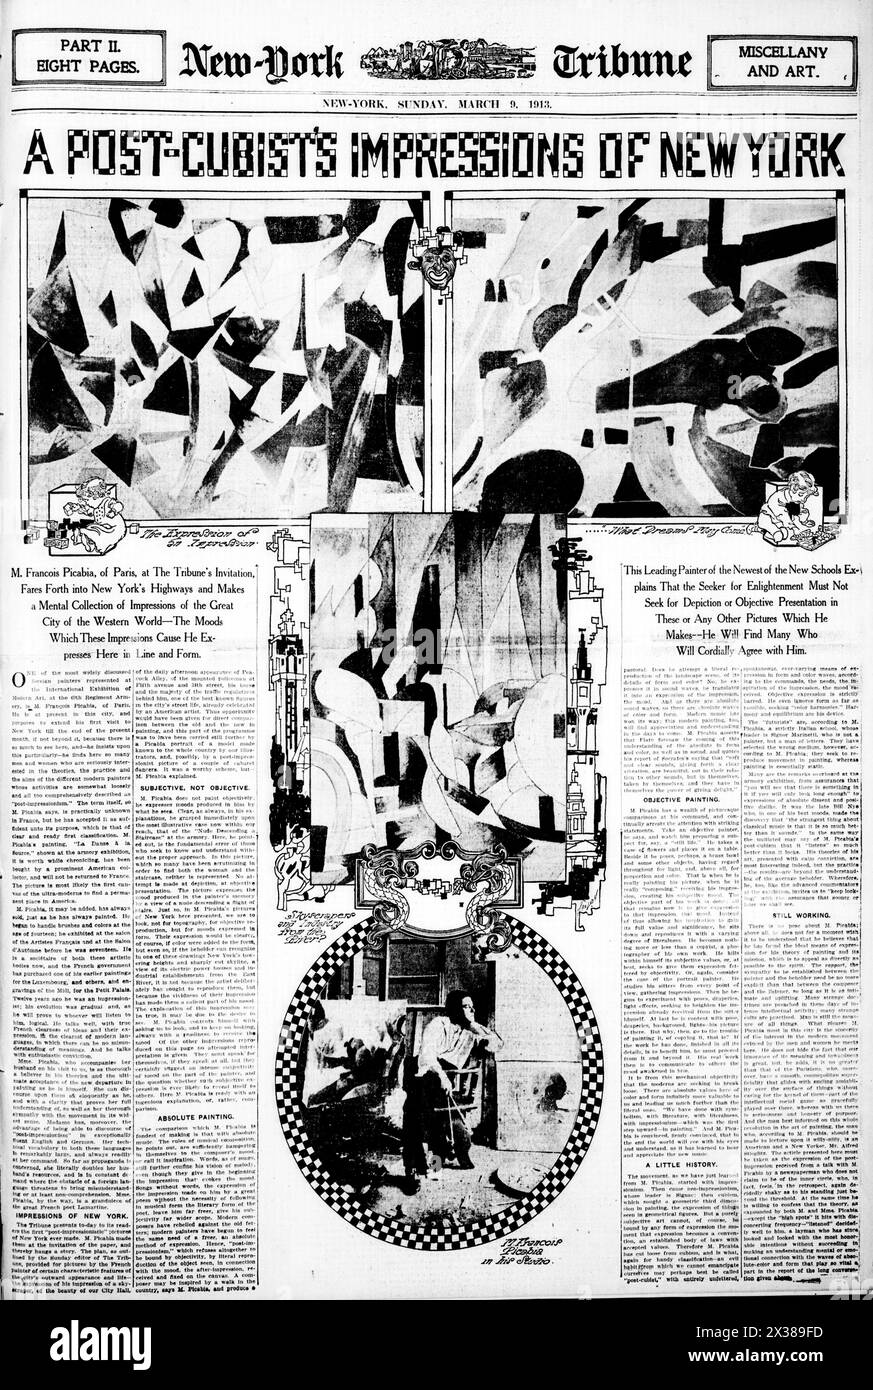 Francis Picabia, paintings published in the New York Tribune, 9 March 1913. Picabia held his first one-man show in New York, Exhibition of New York studies by Francis Picabia, Stock Photo